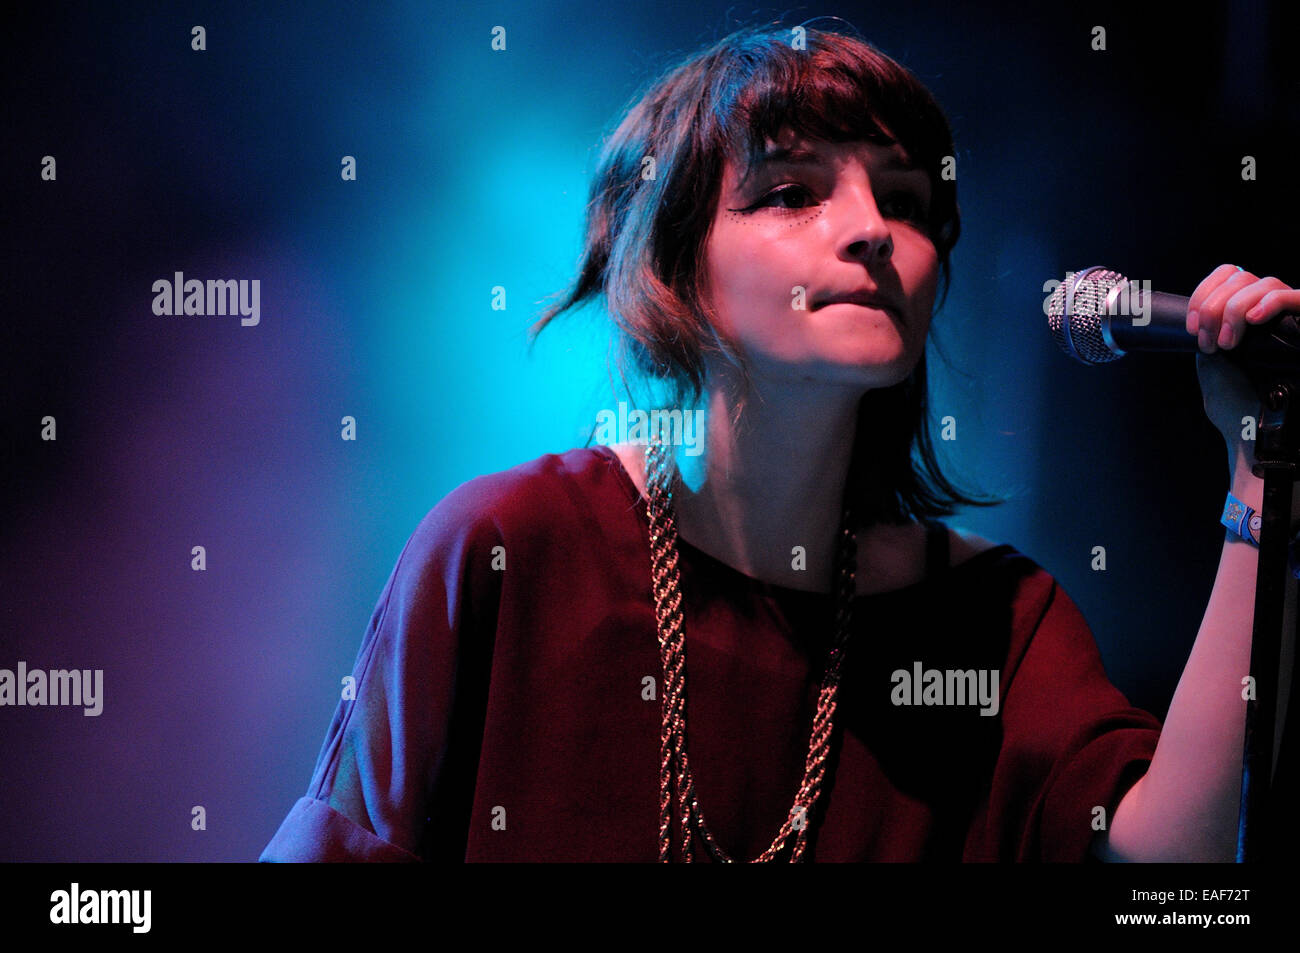 BENICASIM, SPAIN - JULY 21: Lauren Mayberry, vocals an synthesizers of Chvrches band, performs at FIB. Stock Photo